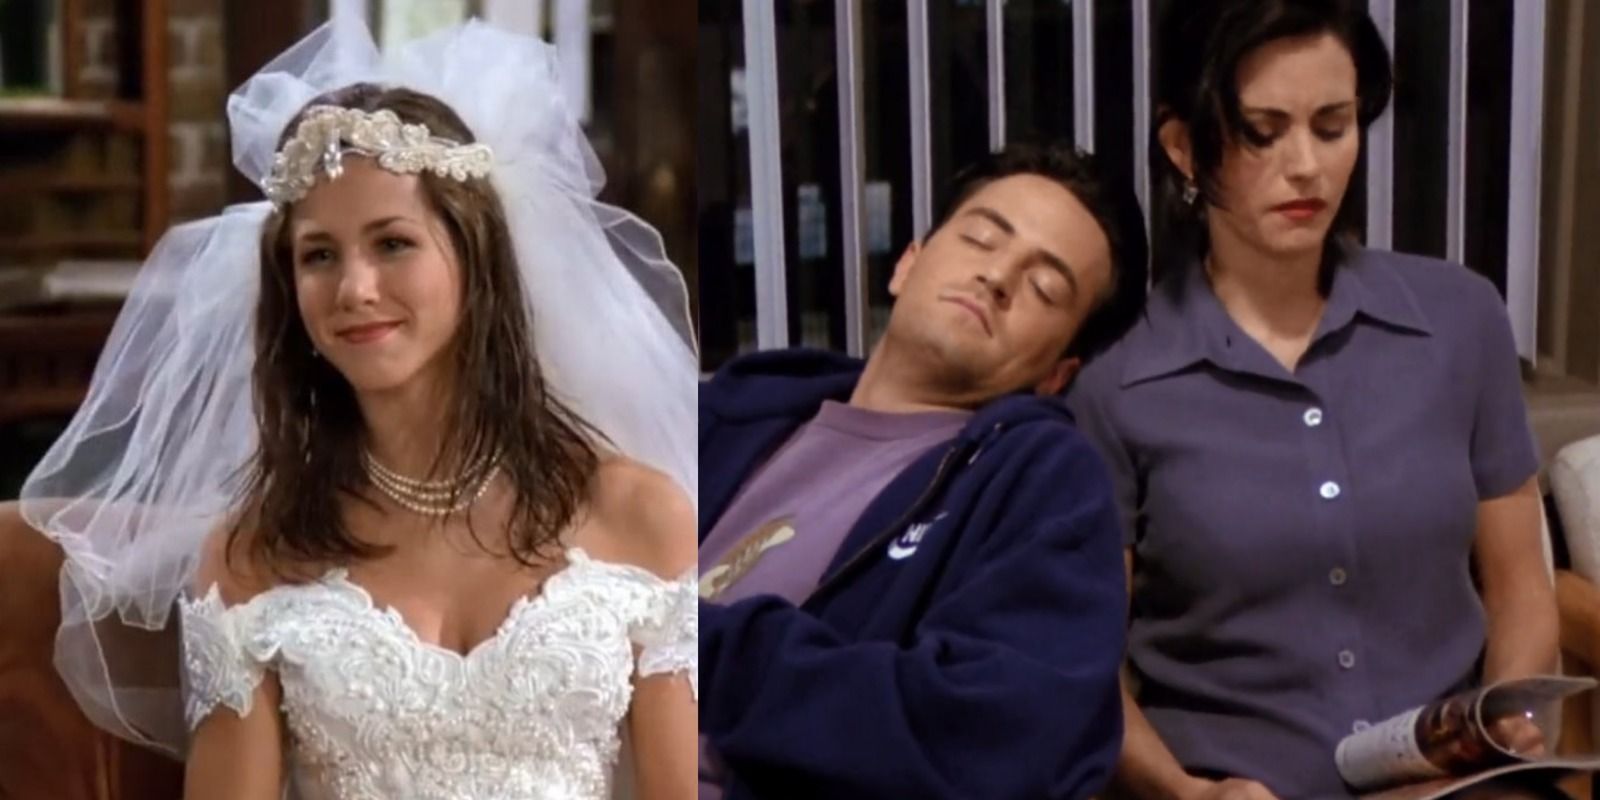 Friends: 10 Great Examples Of Foreshadowing & Continuity That Paid Off